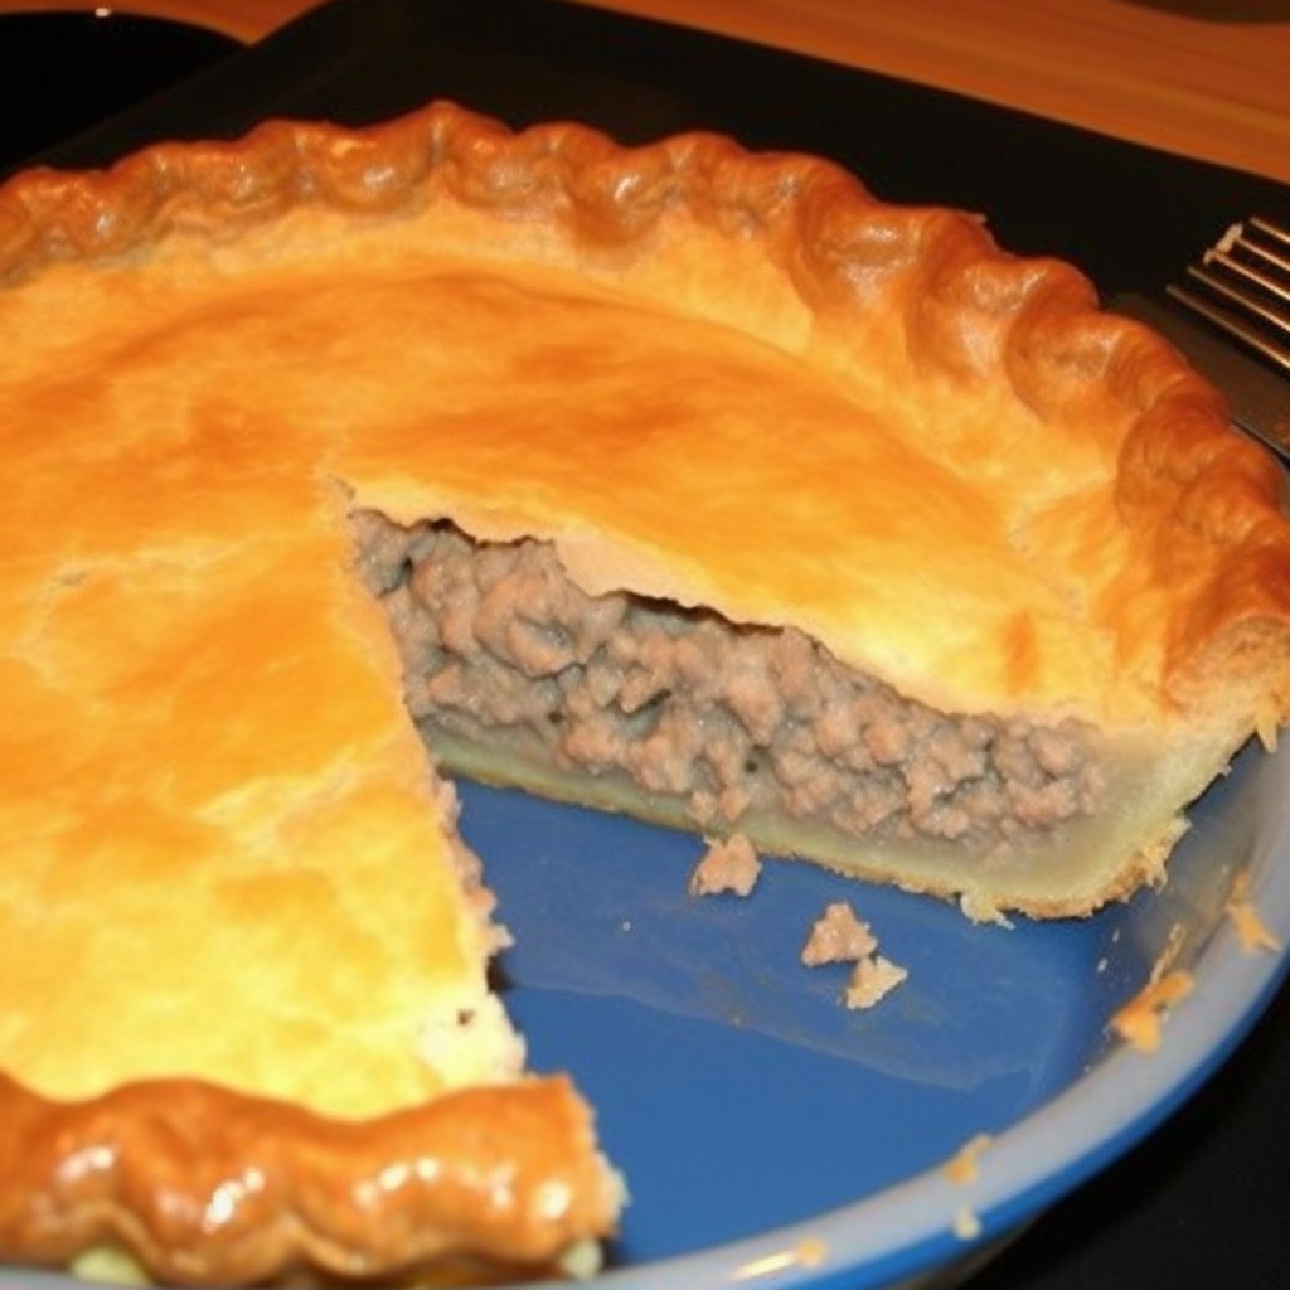 Discover how to make a traditional French Meat Pie that brings comfort and flavor to your dinner table. Perfect for holidays and family meals!